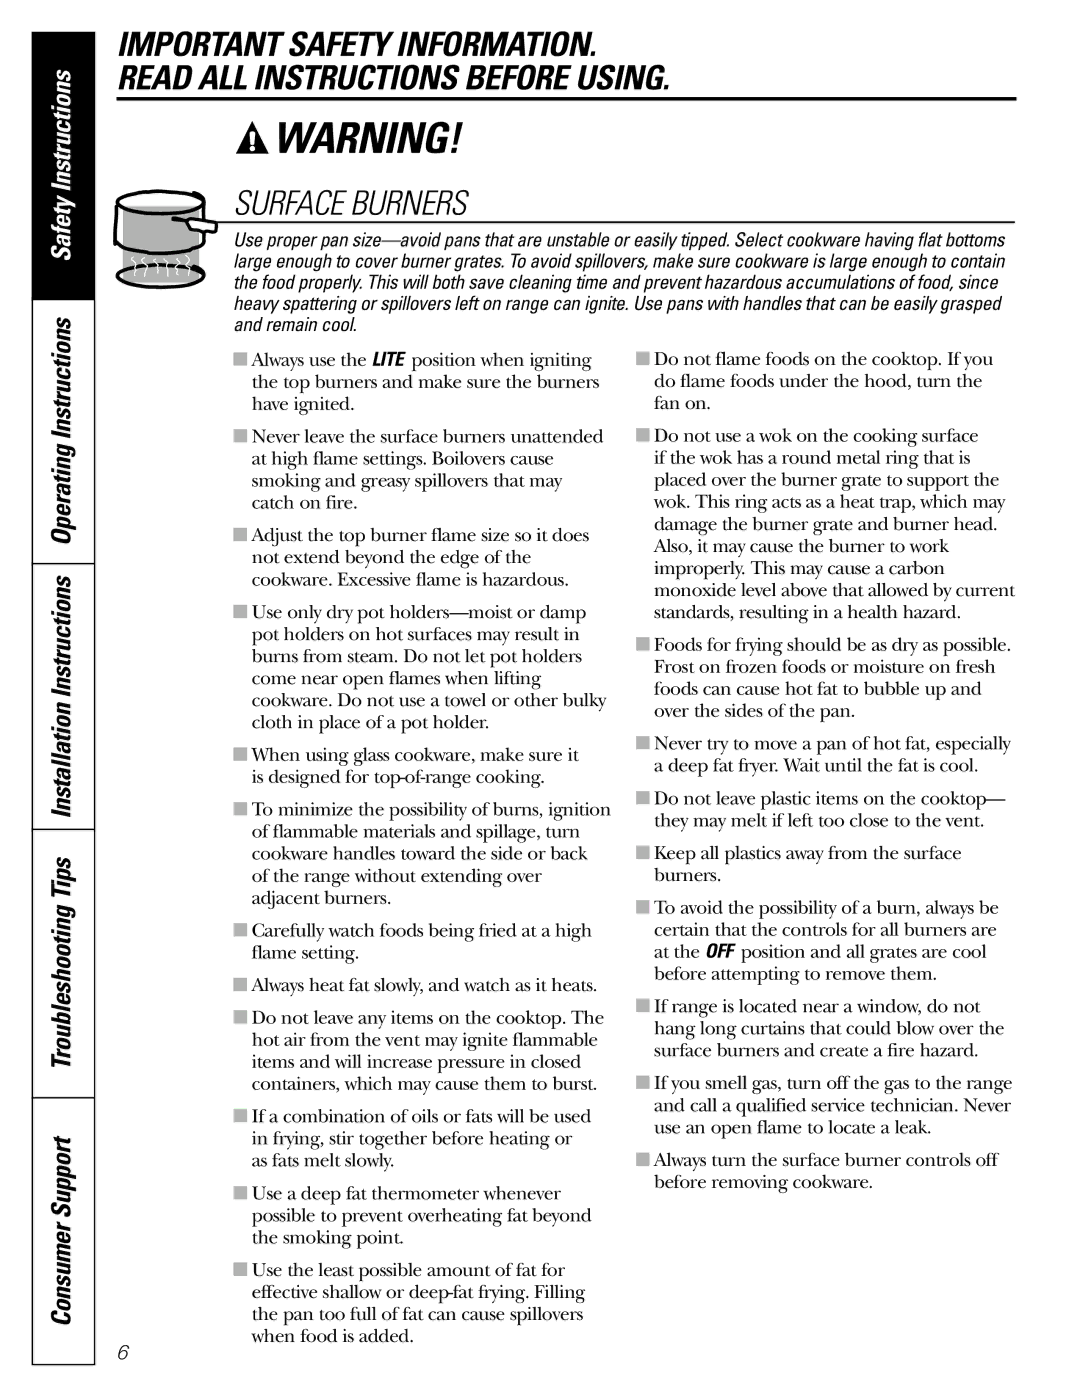 GE J2B915 installation instructions Surface Burners, Safety Instructions 